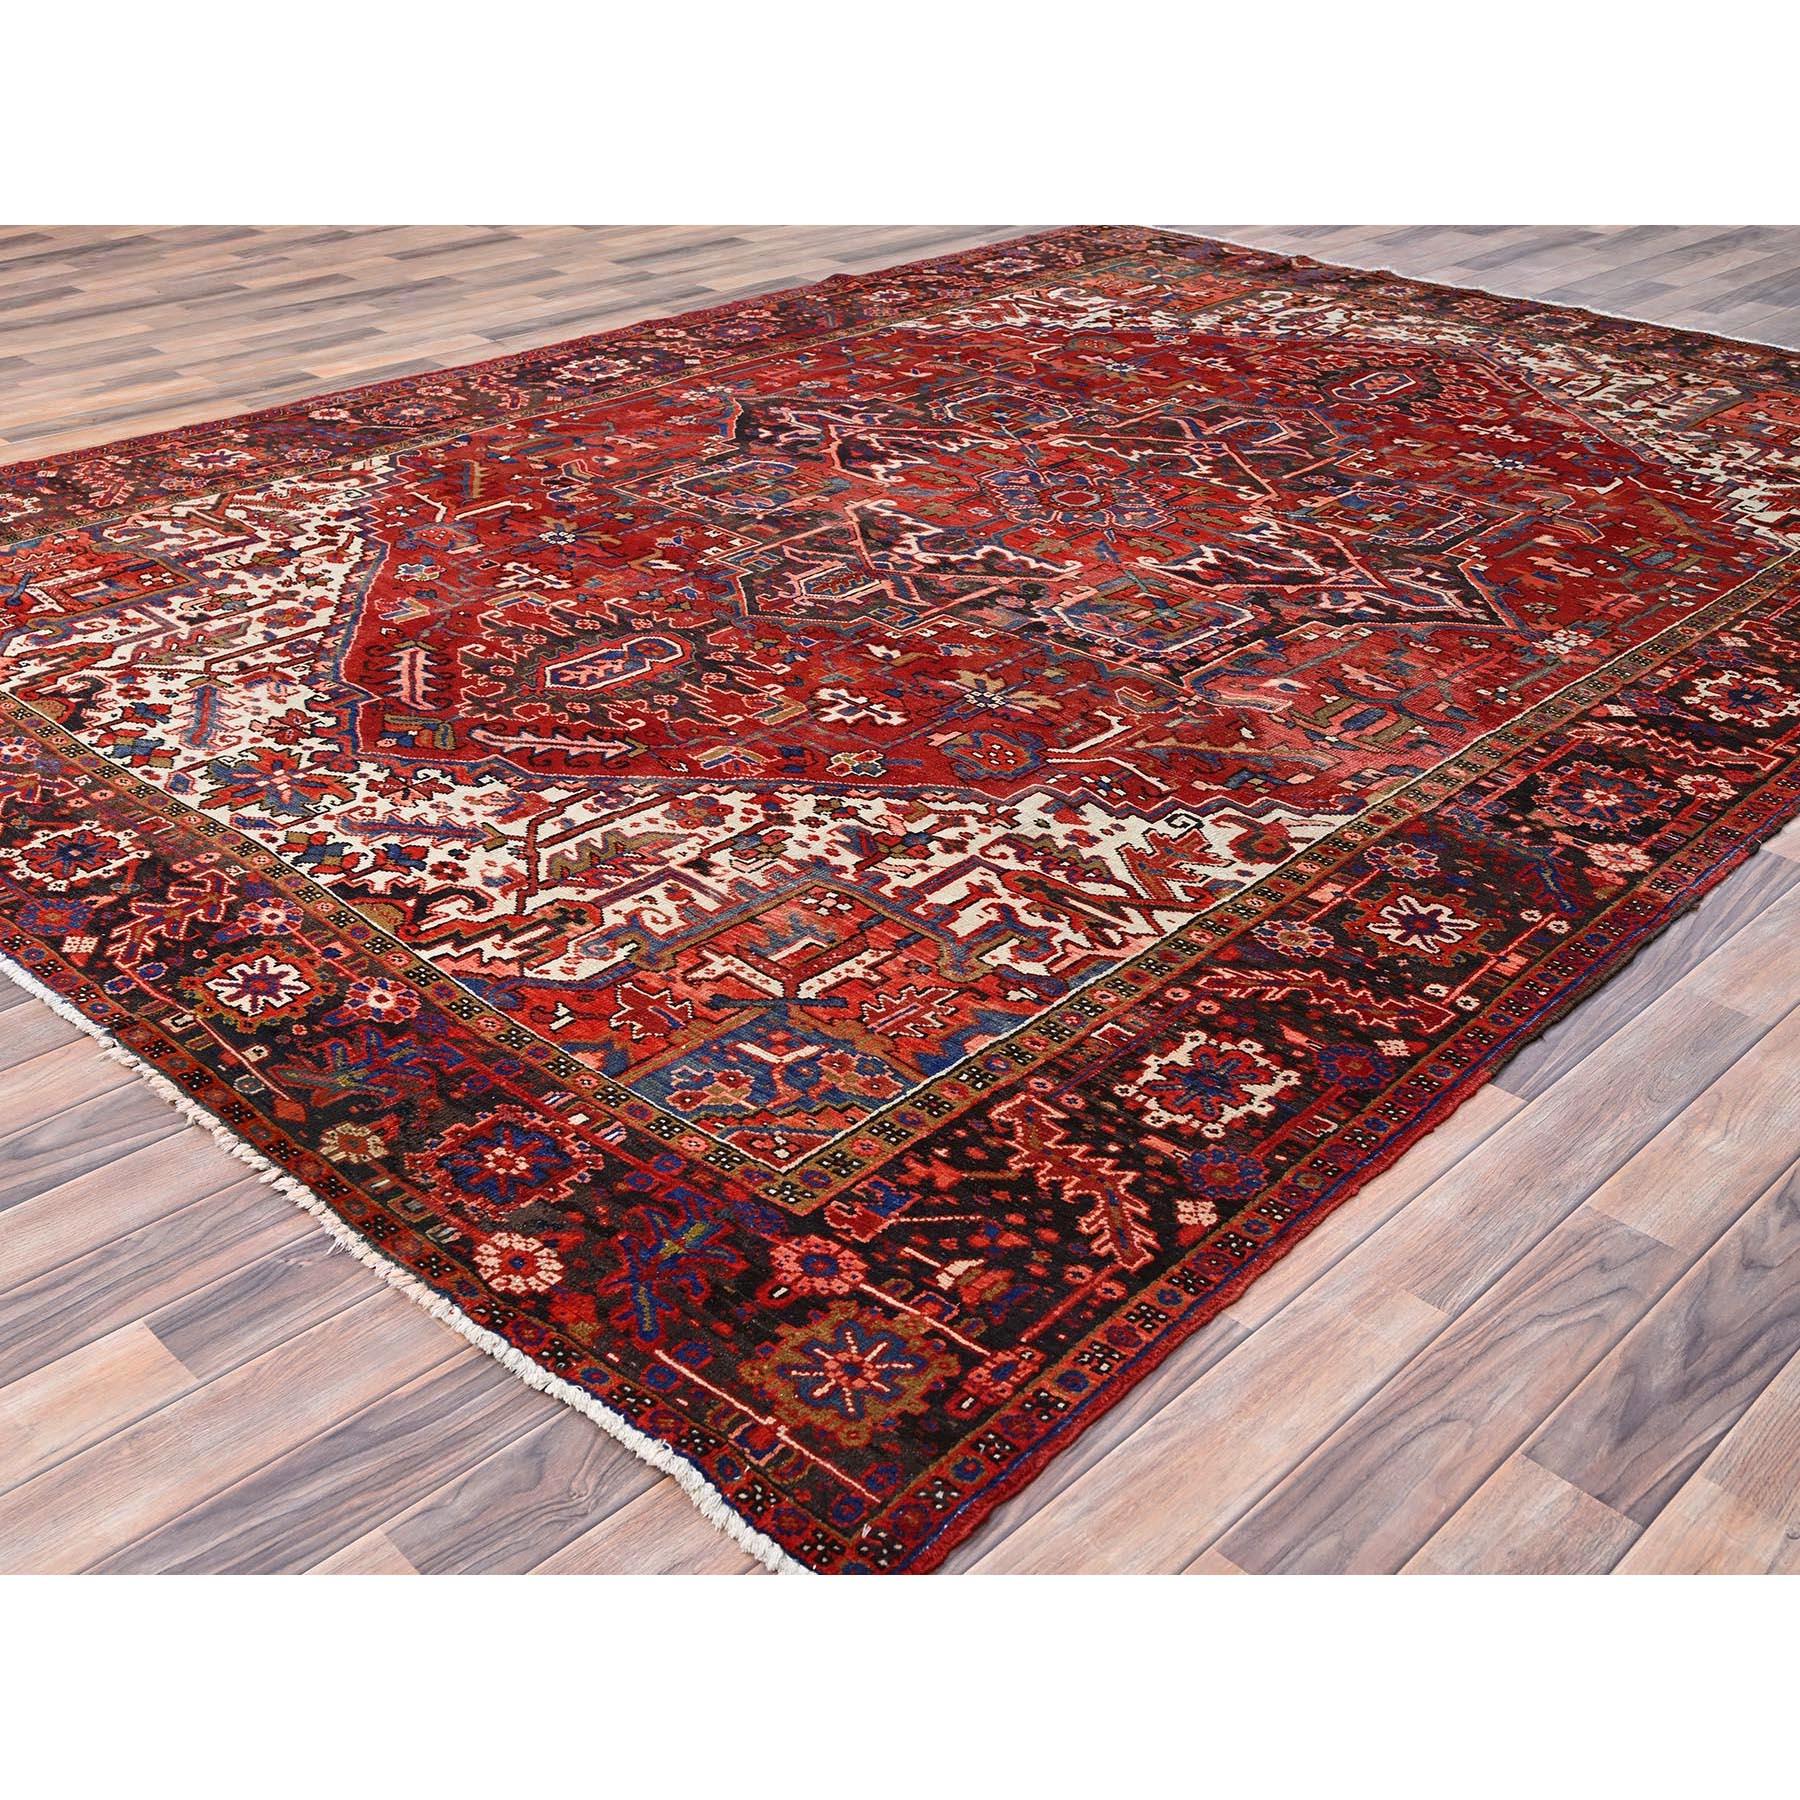 Red Hand Knotted Semi Antique Persian Heriz Good Cond Rustic Look Worn Wool Rug In Good Condition For Sale In Carlstadt, NJ